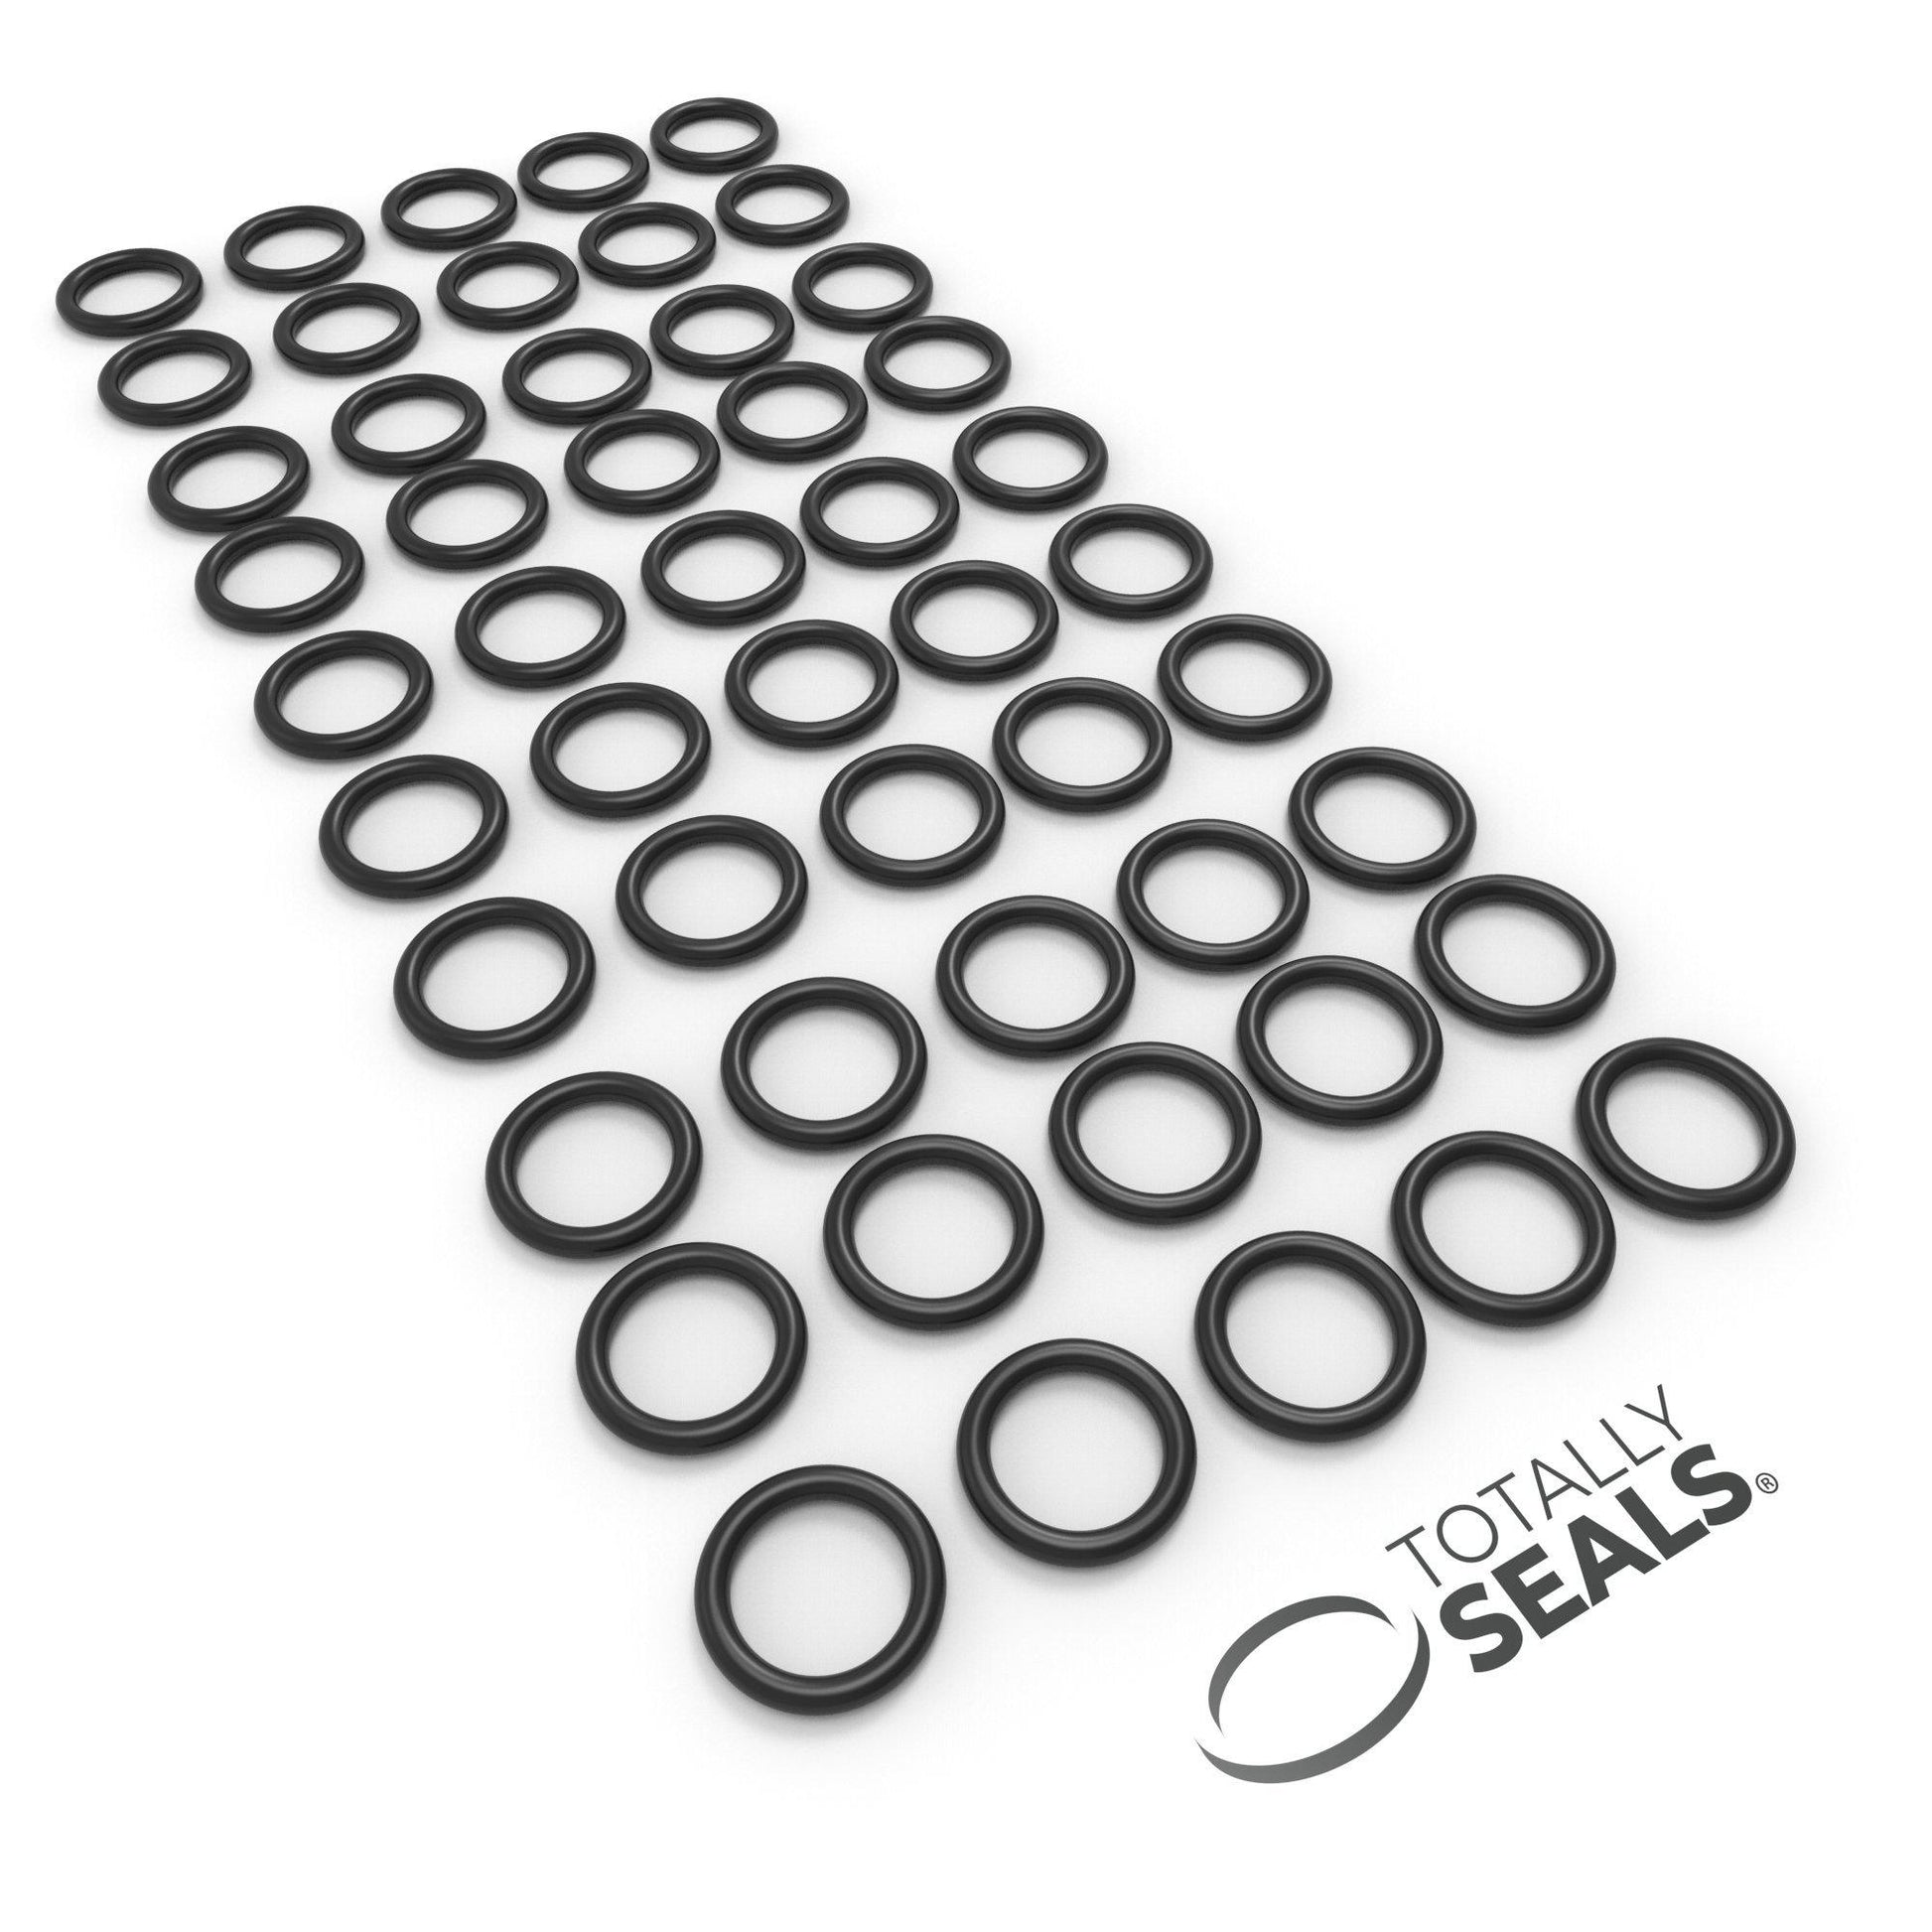 27mm x 1mm (29mm OD) Nitrile O-Rings - Totally Seals®